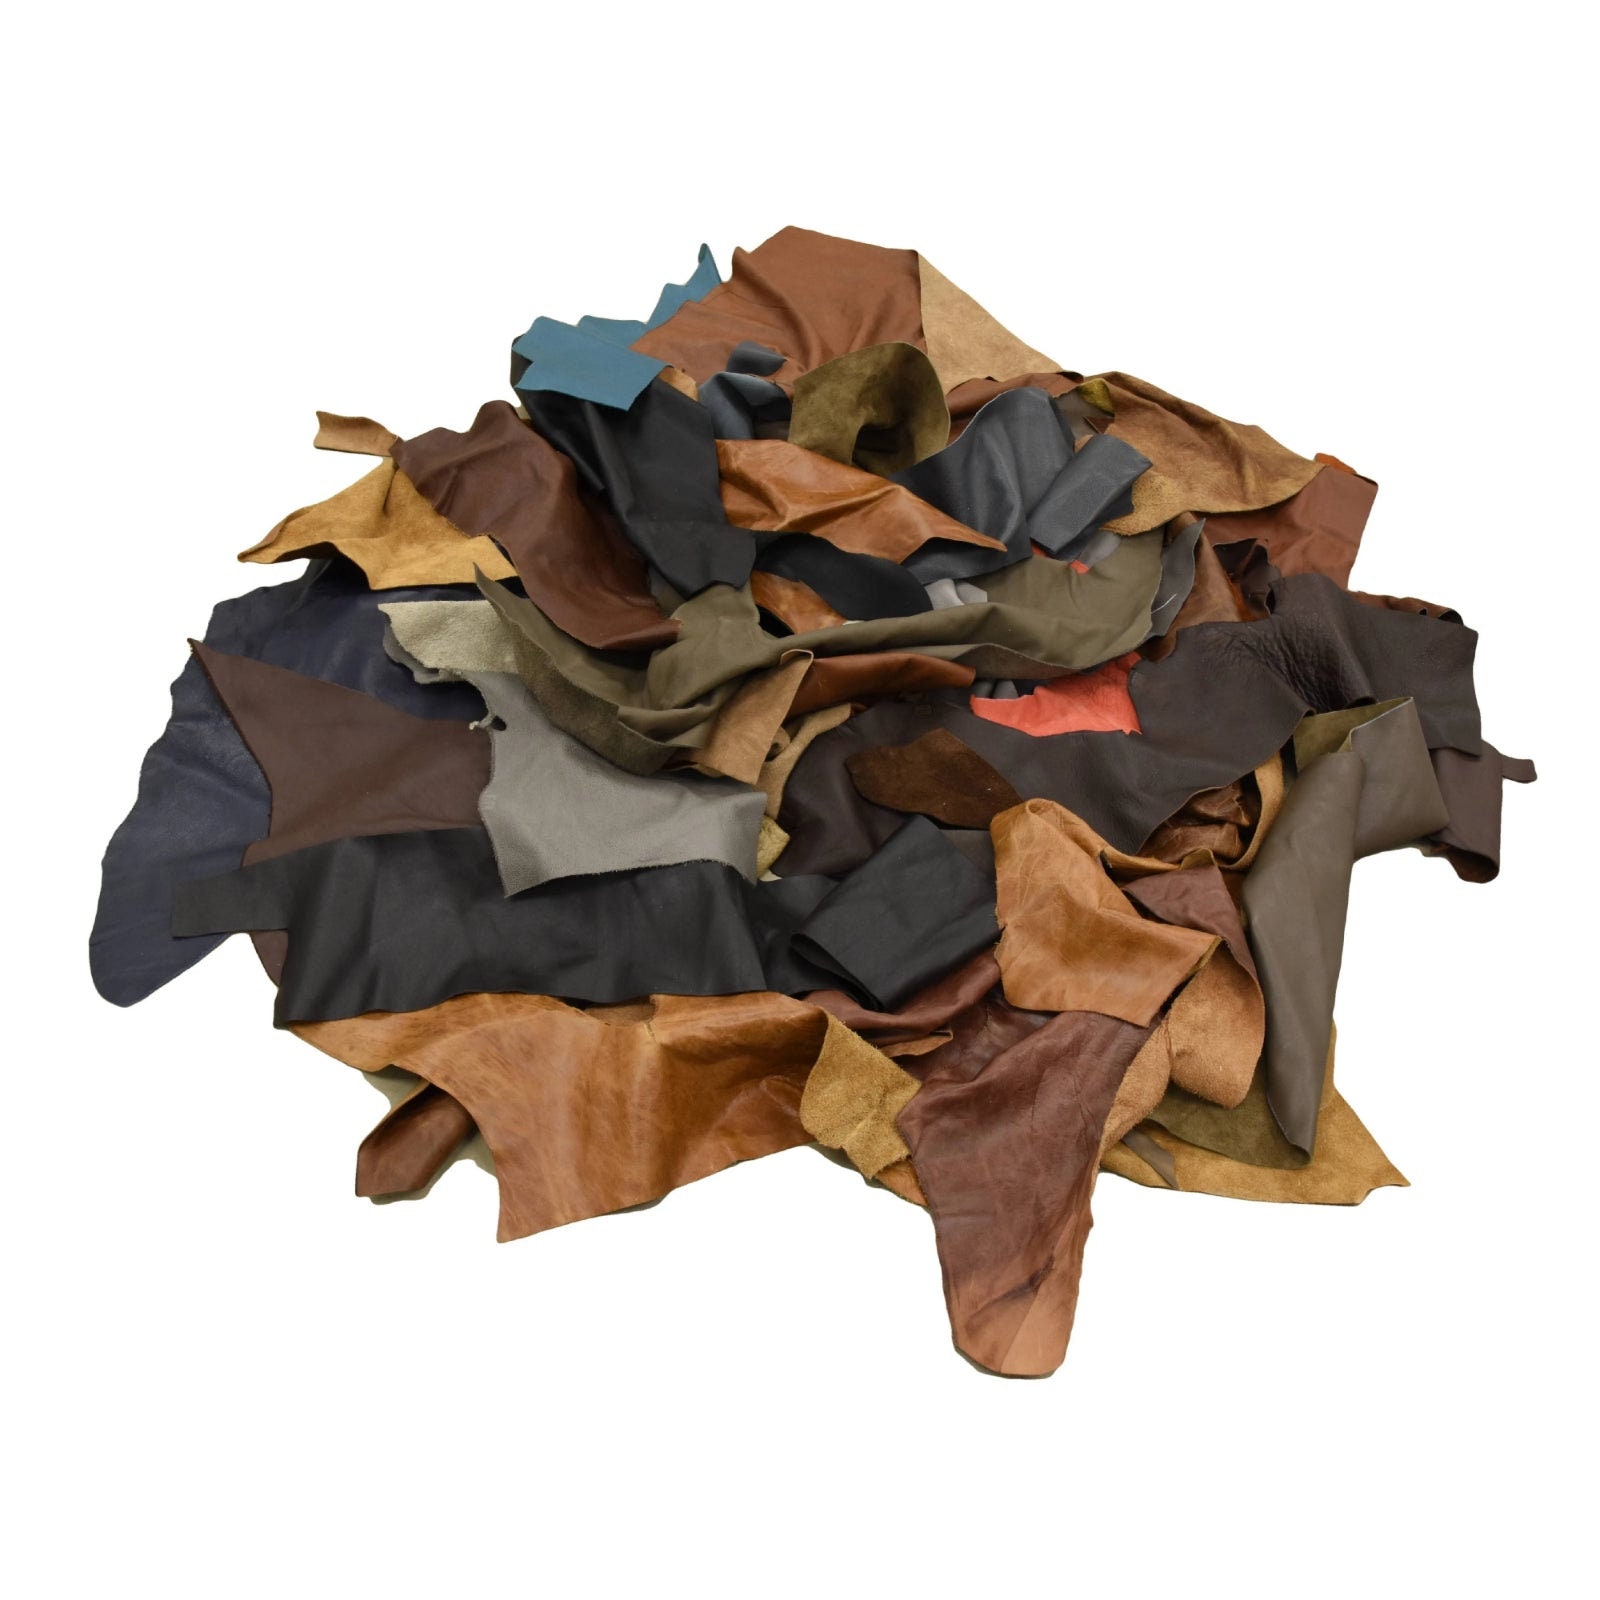 Rugged Wholesale Leather Scrap for Sale For Clothing And